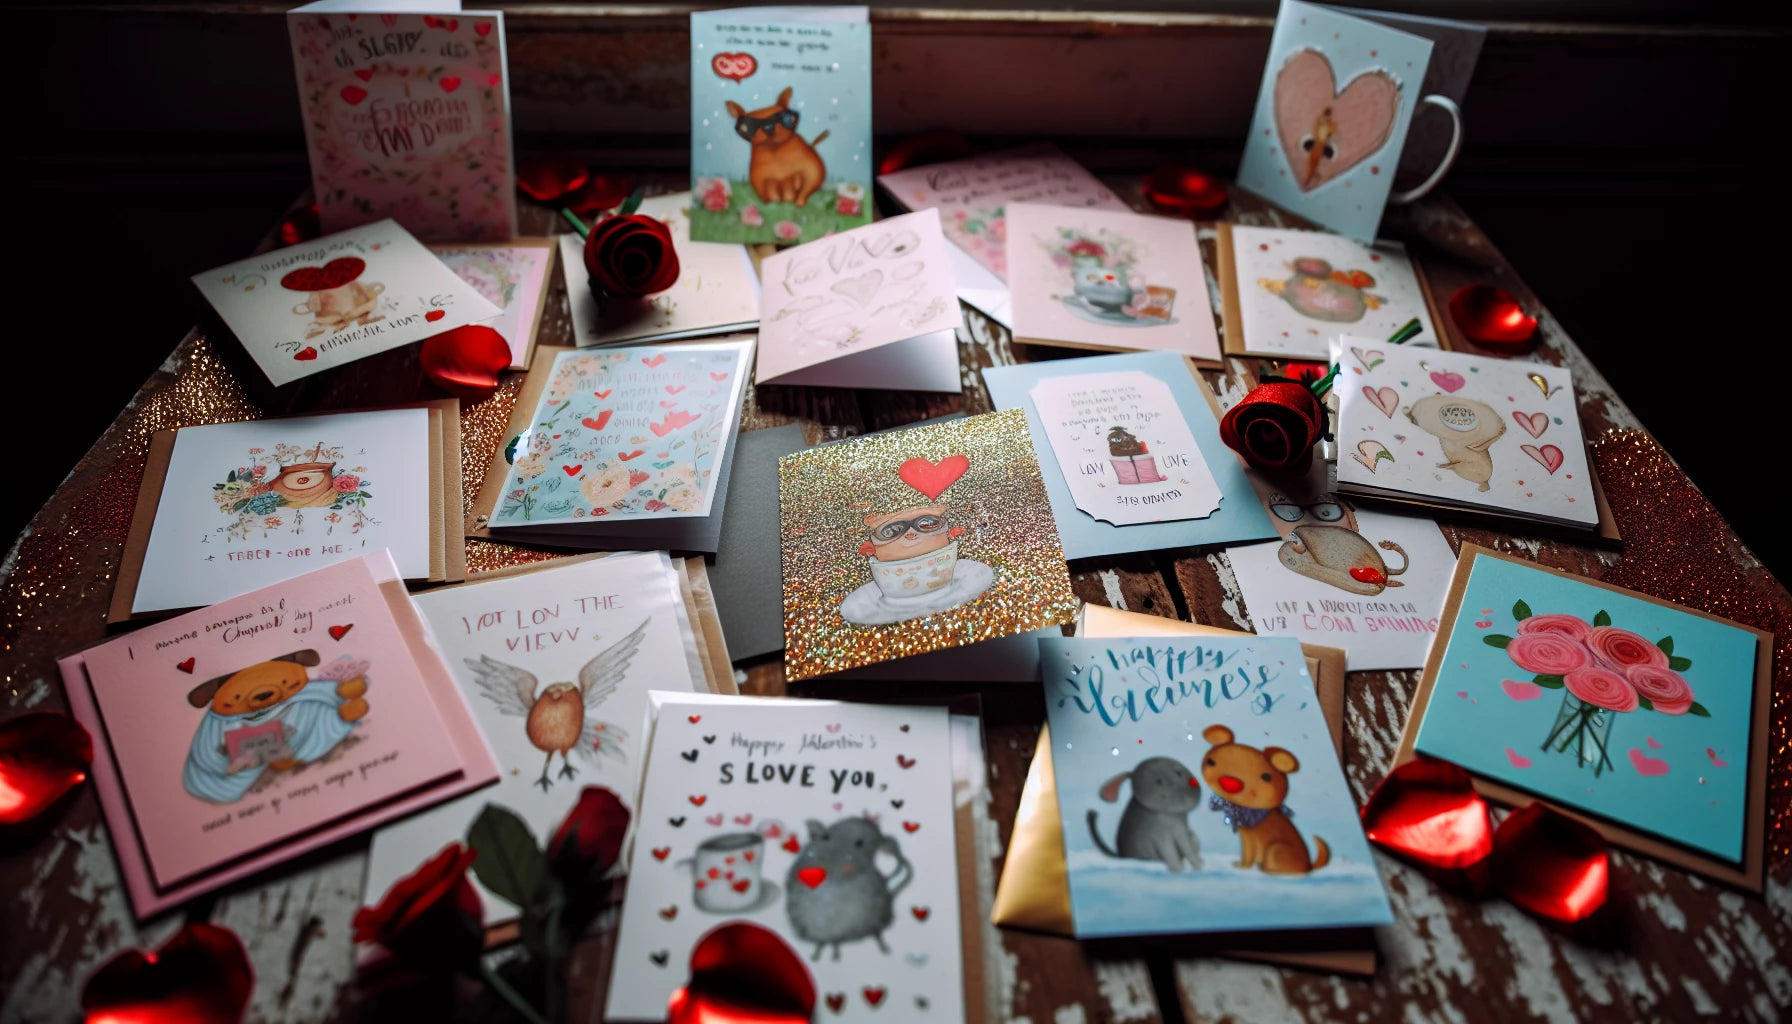 A variety of Valentine's Day cards spread out on a table